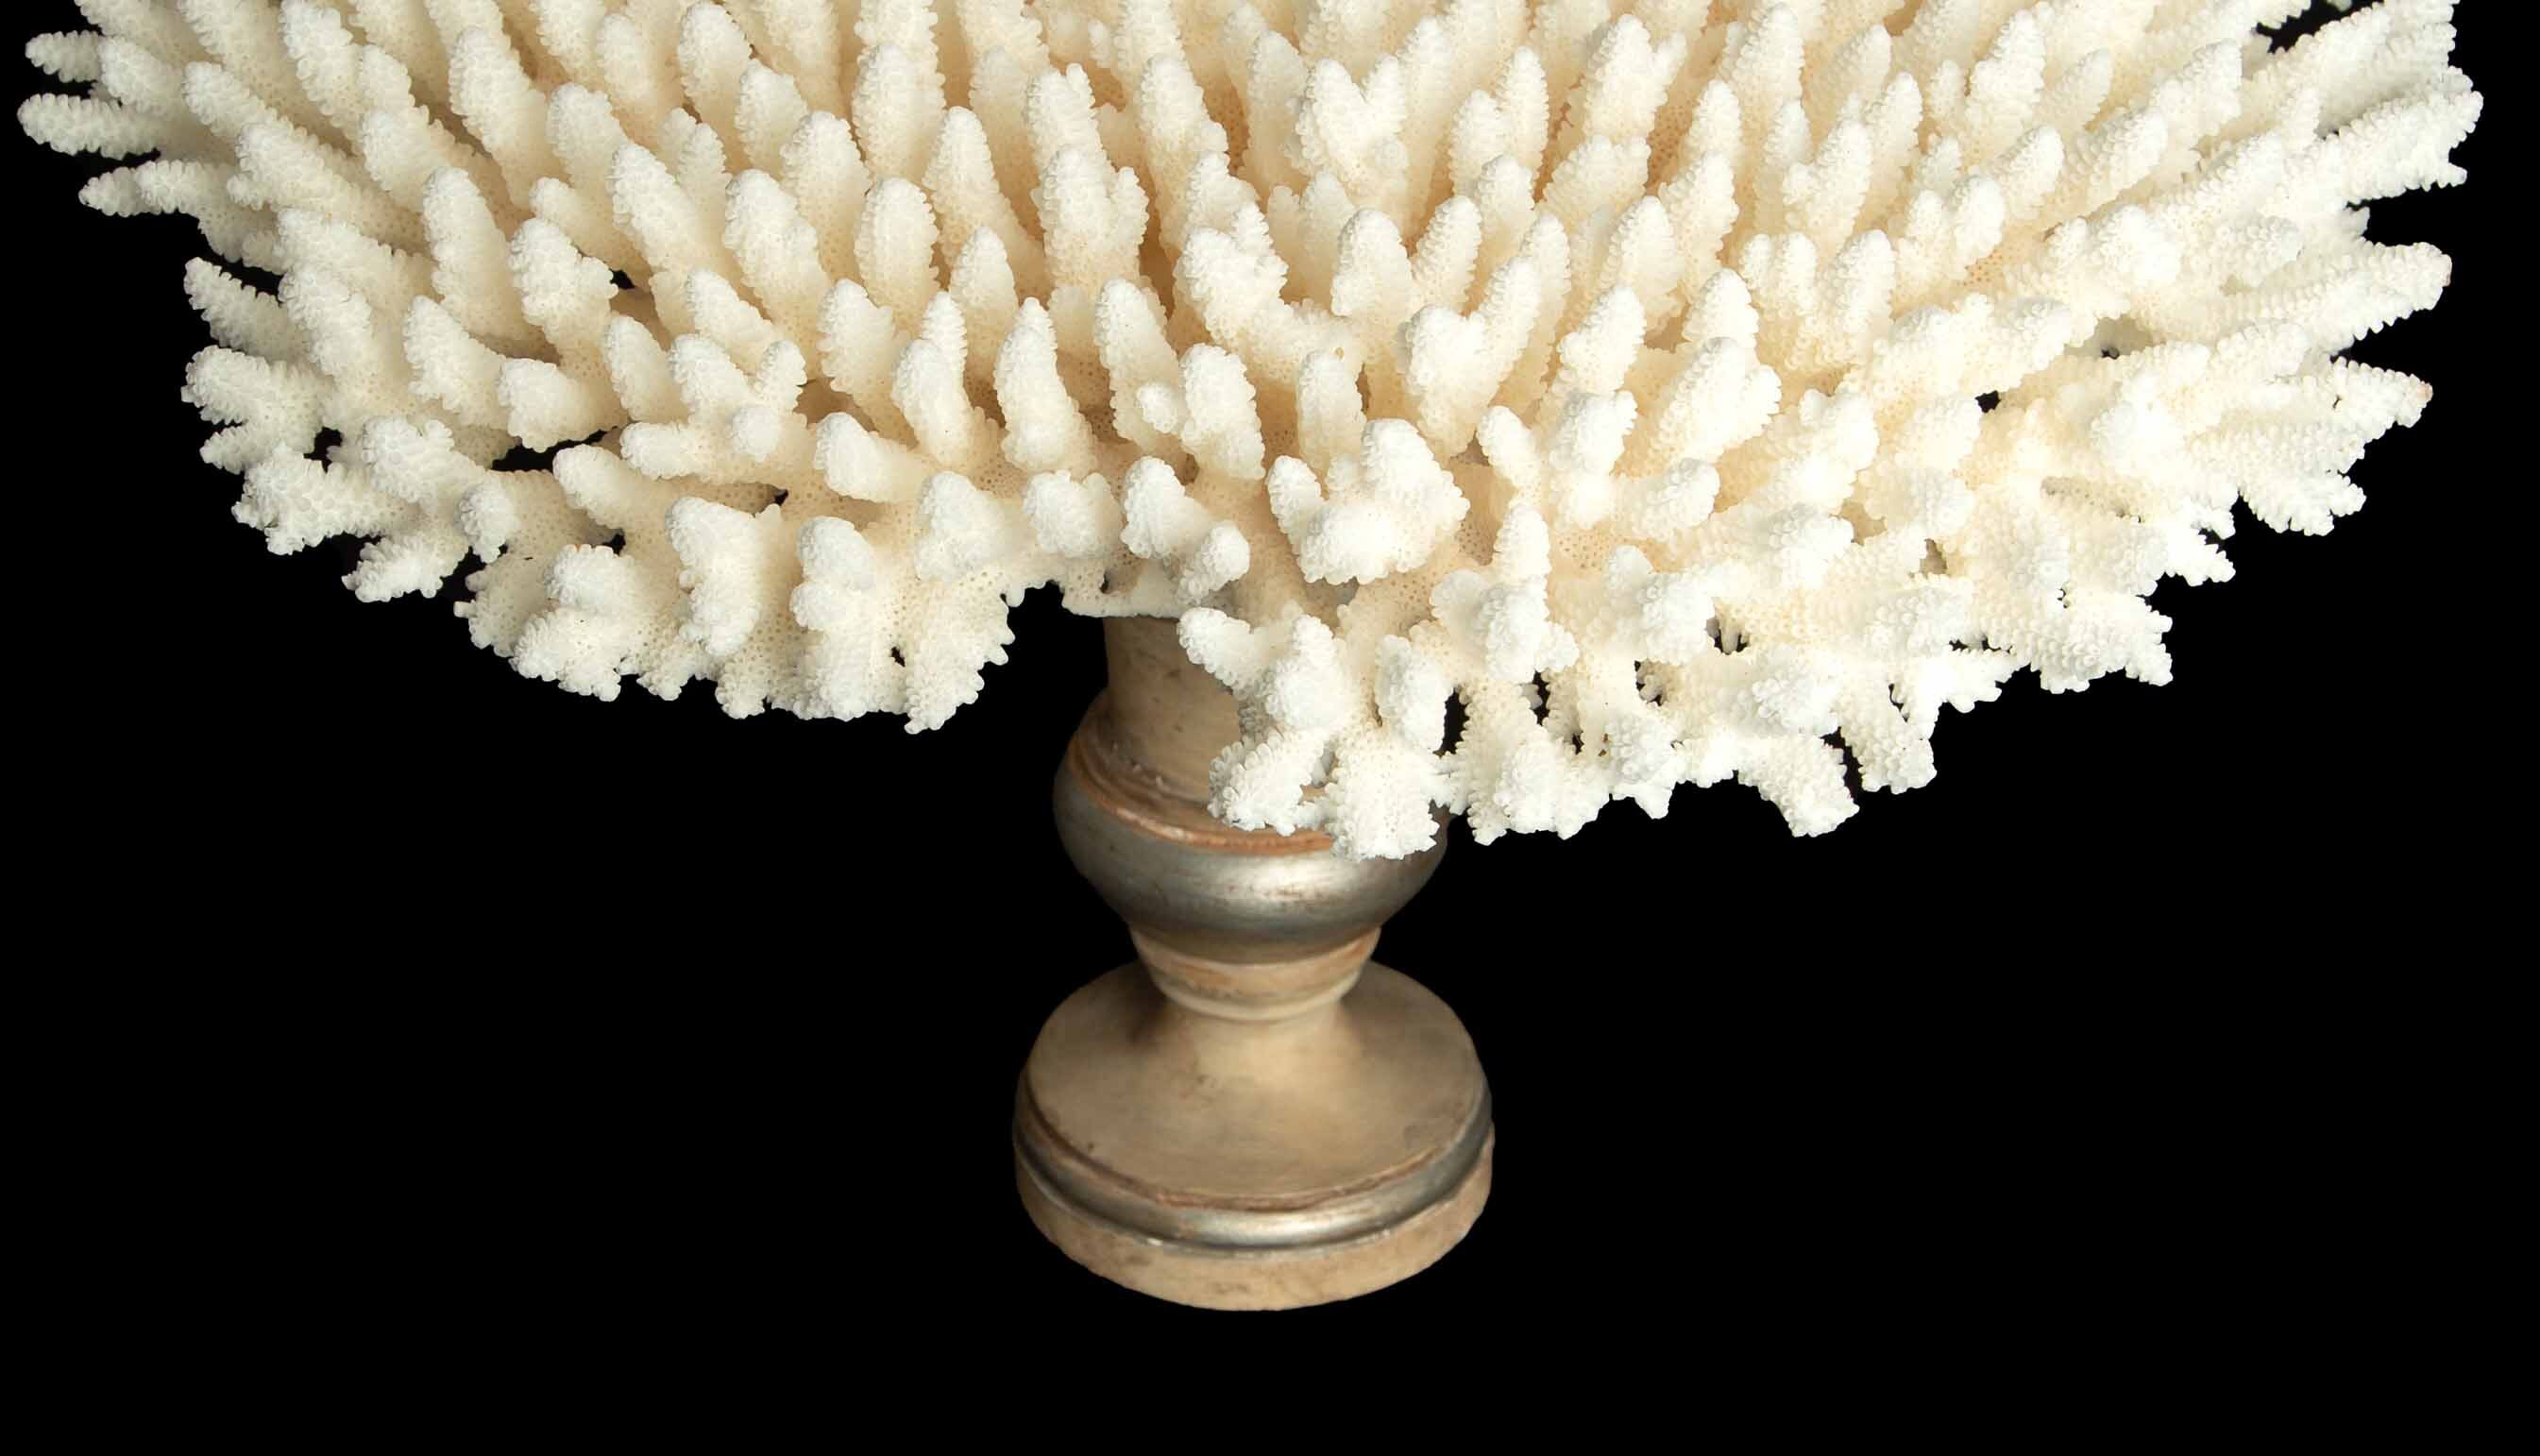 Table Coral Mounted On Medici Style Base